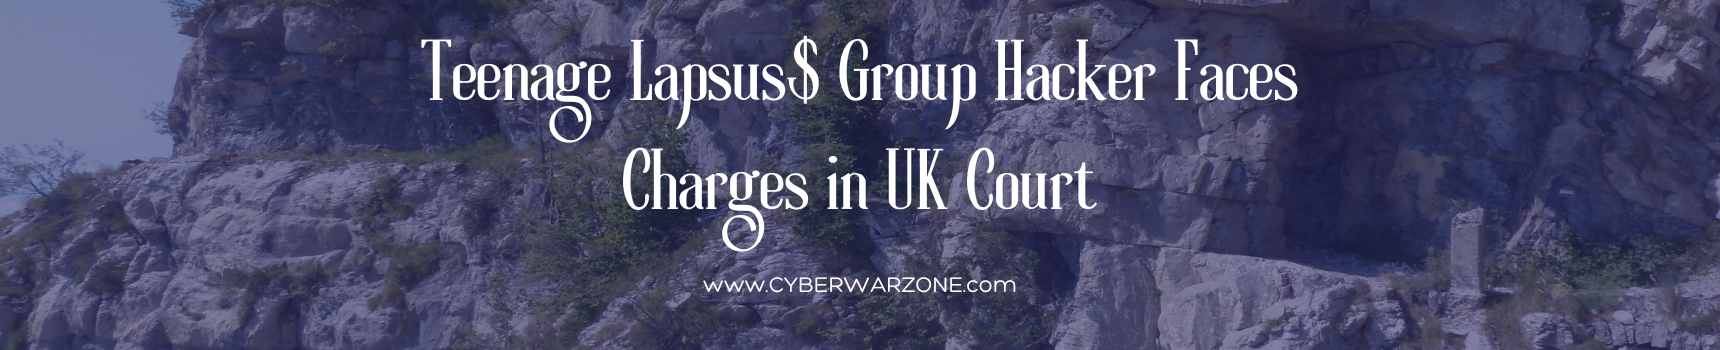 Teenage Lapsus$ Group Hacker Faces Charges in UK Court